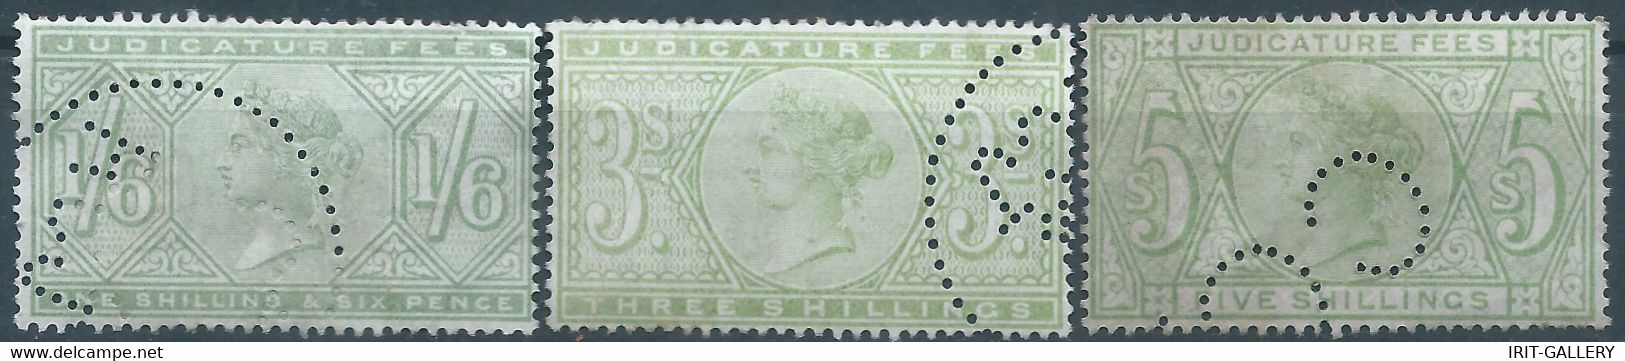 Great Britain-ENGLAND,Queen Victoria,1870-1800 Revenue Stamp Tax Fisca,JUDICATURE FEES,1/6-3-5 Shillings,PERFIN - Used - Revenue Stamps